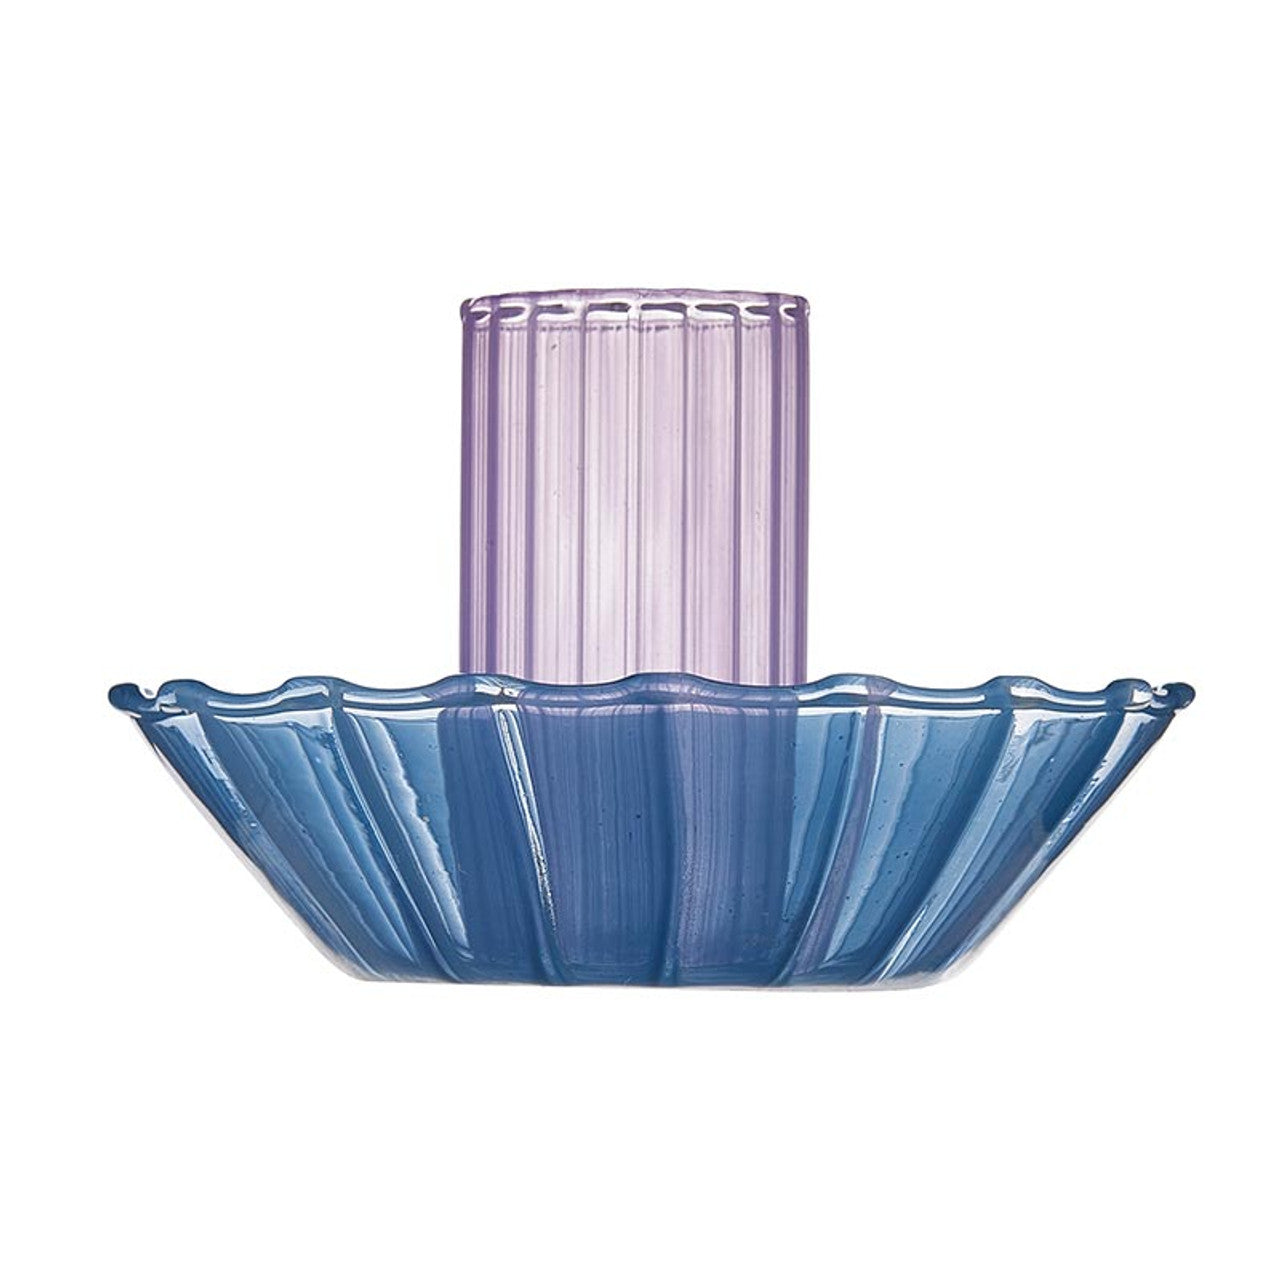 Vintage-Inspired Glass Candle Holder In Blue and Lilac